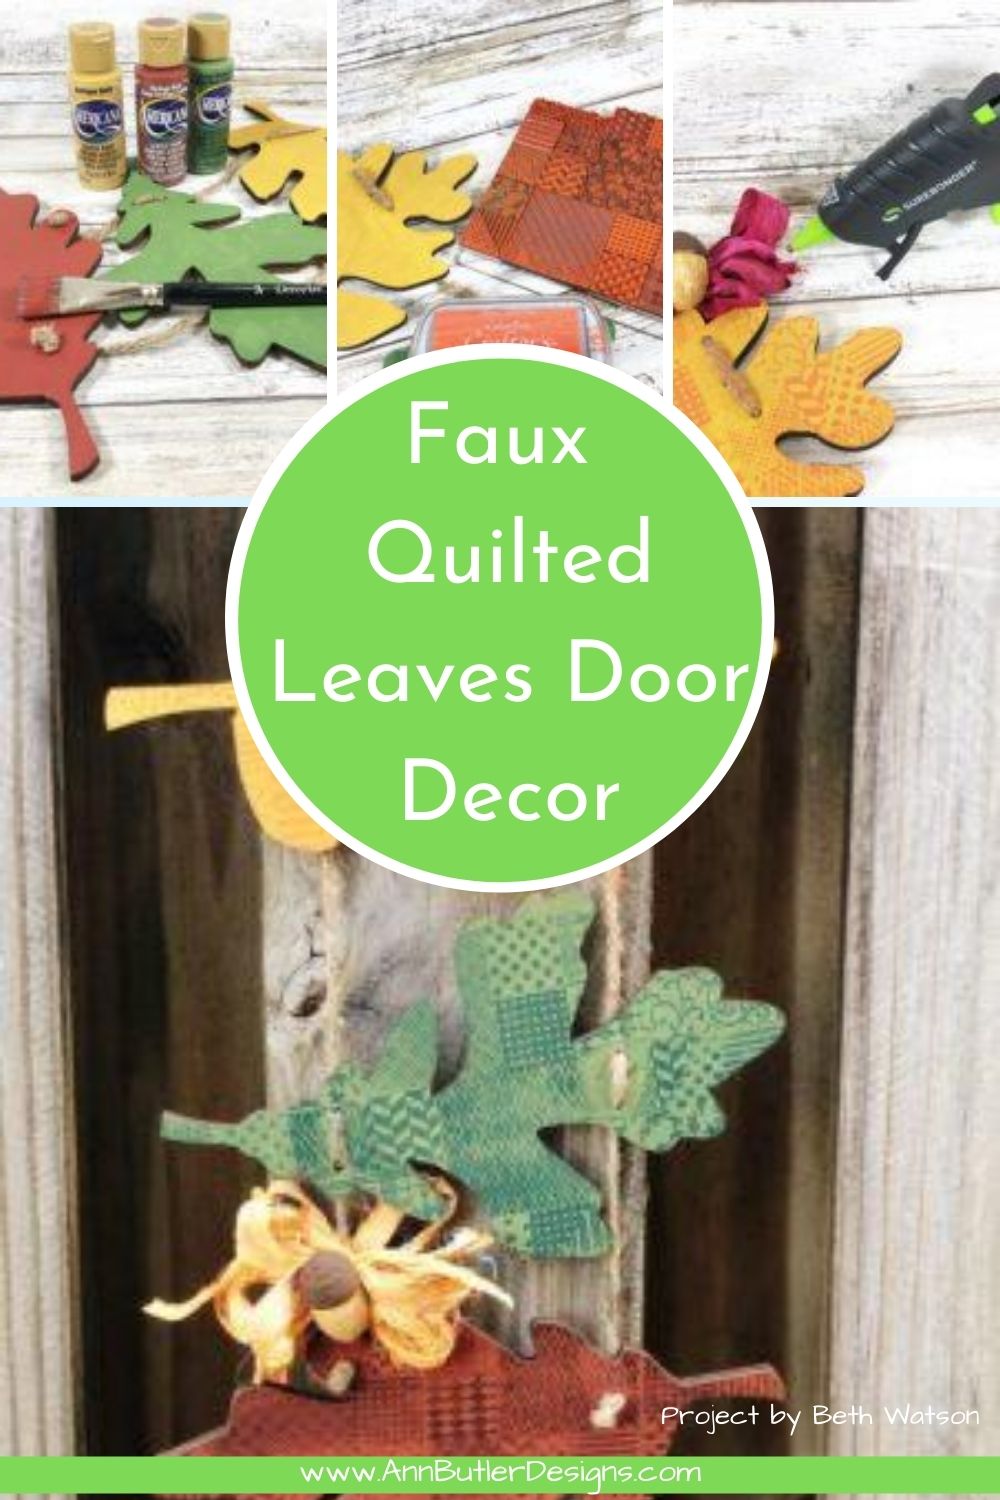 Faux Quilted Leaves Door Decor Pin